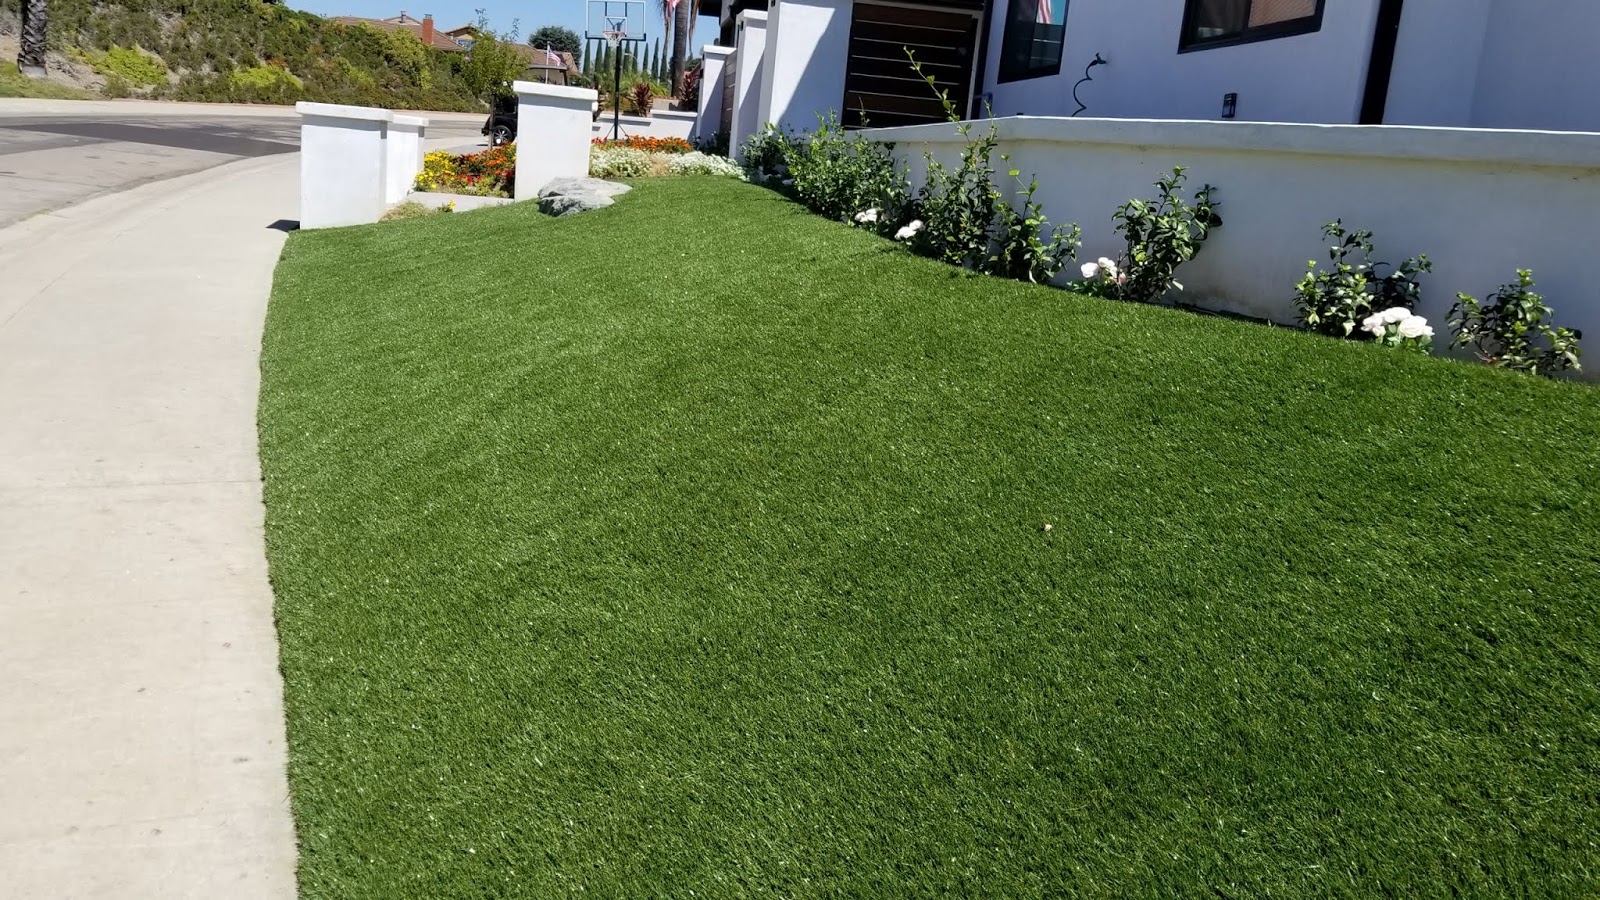 How To Install Artificial Grass On A Steep Slope In Del Mar?